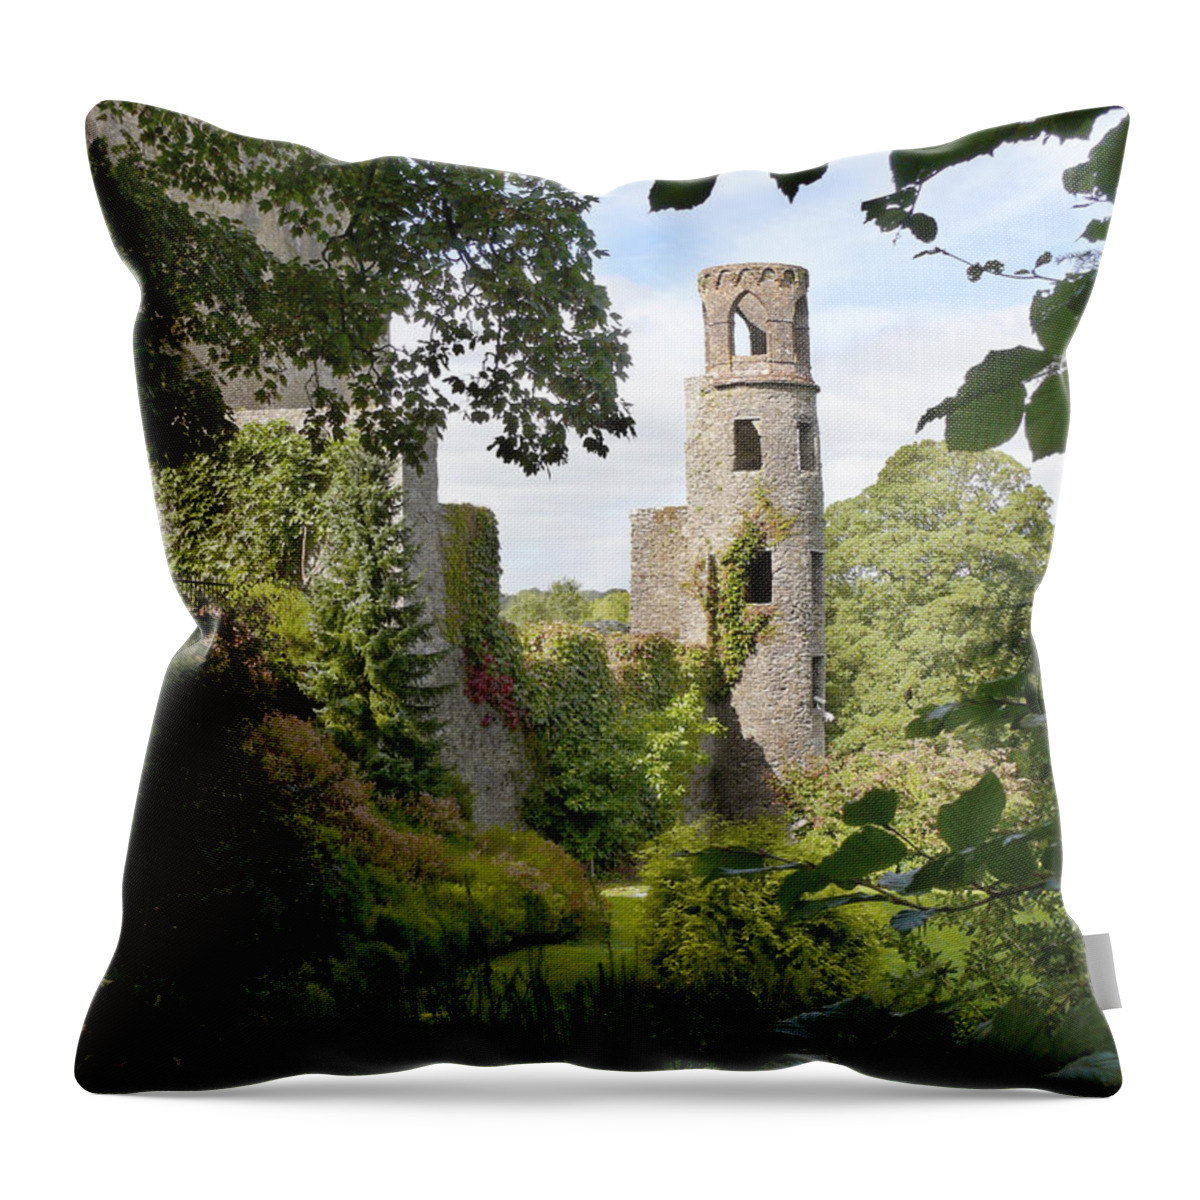 Ireland Throw Pillow featuring the photograph Blarney Castle 2 by Mike McGlothlen